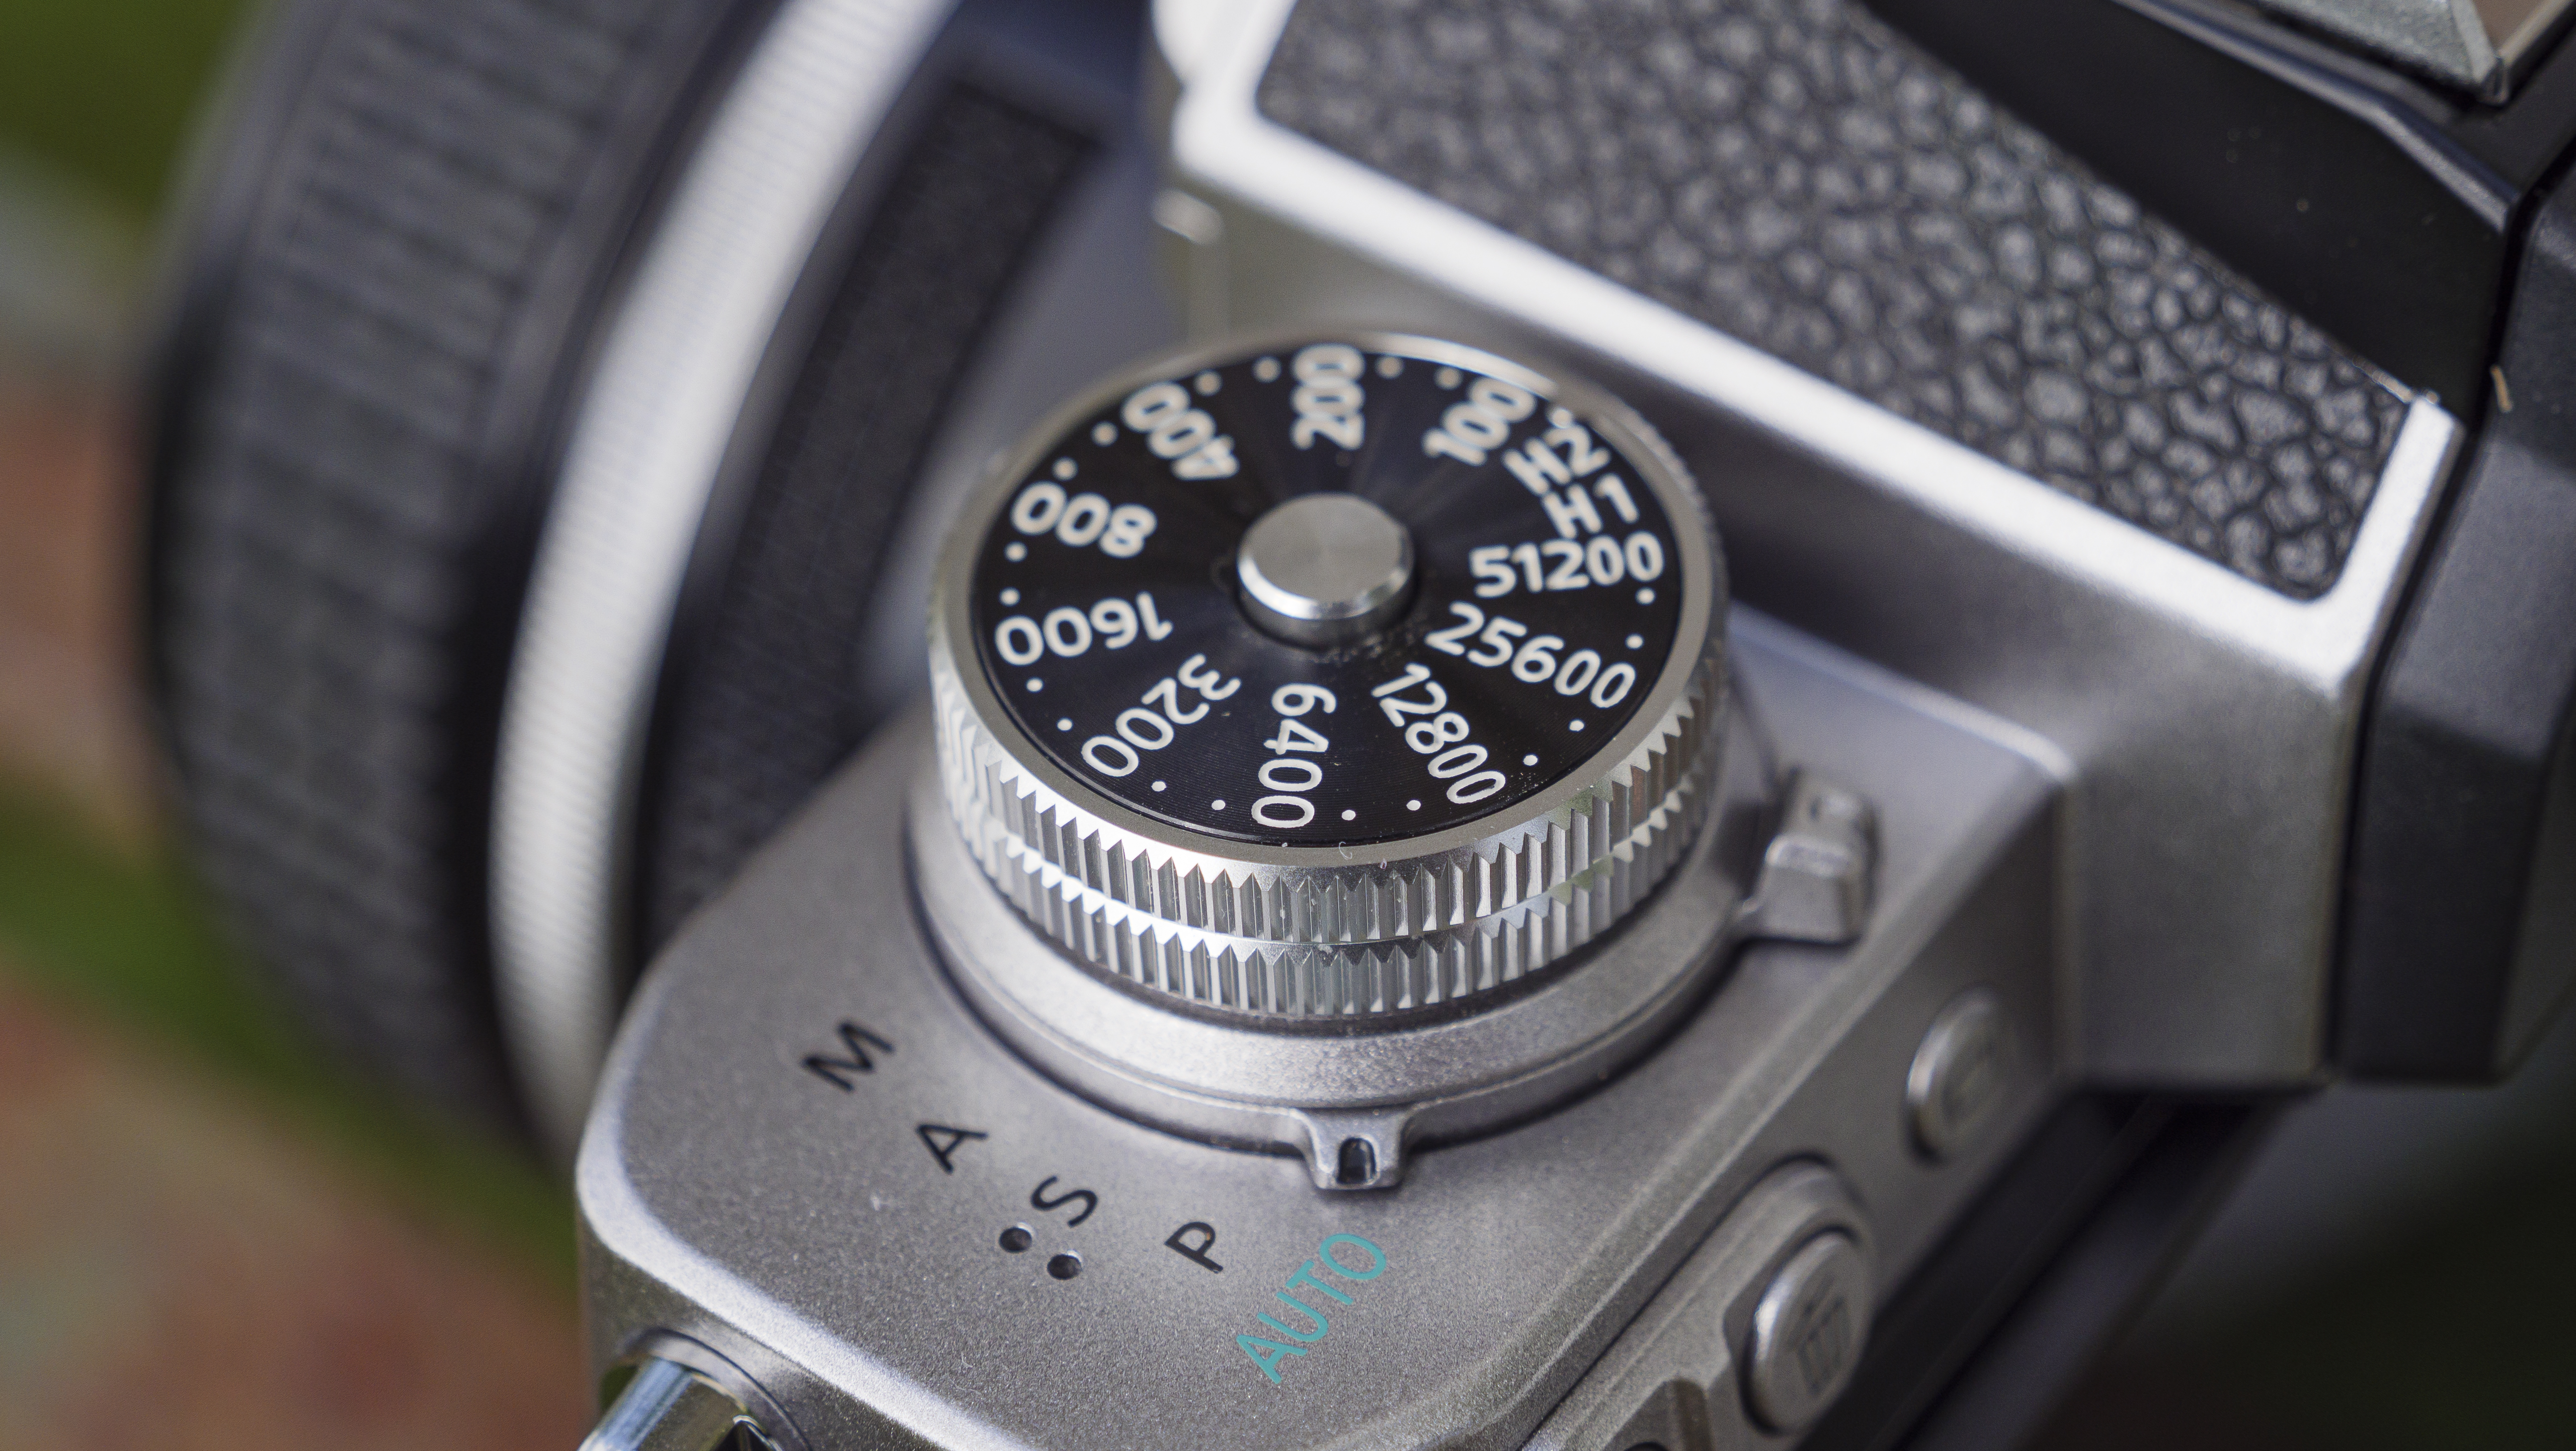 The ISO dial of the Nikon Z fc